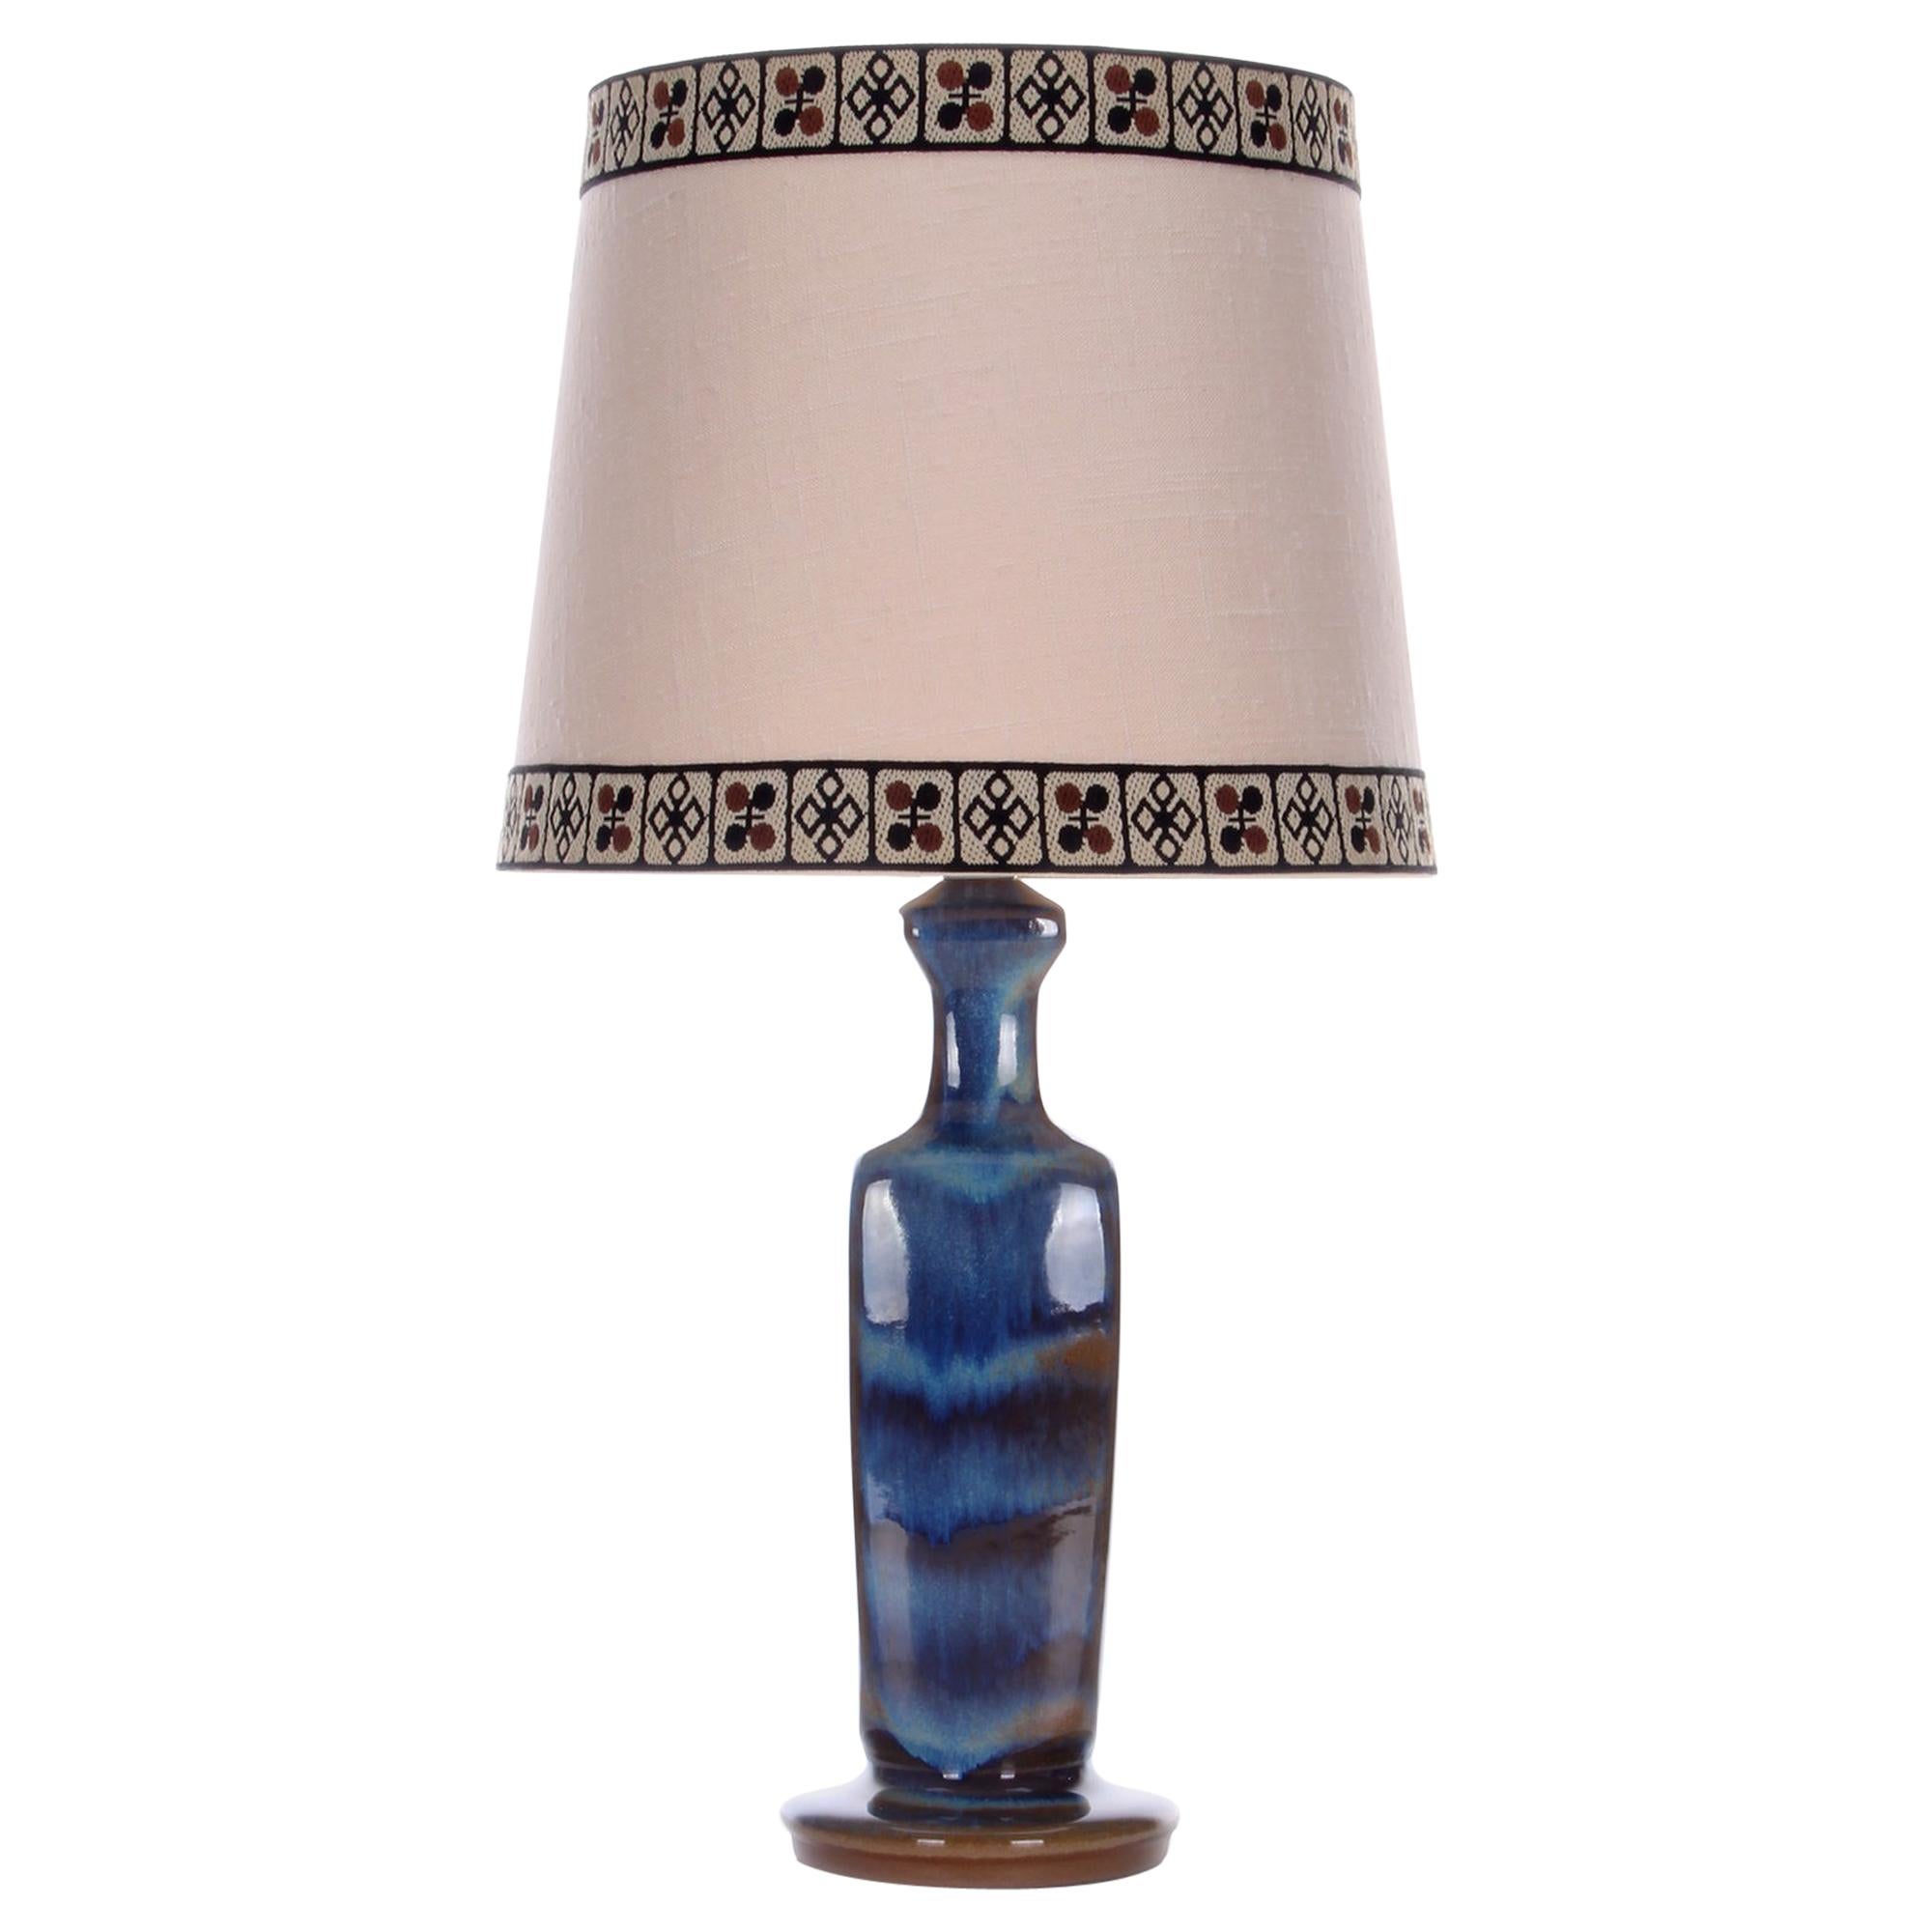 Blue Table Lamp by Michael Andersen & Son 1960s, with Vintage Shade Included